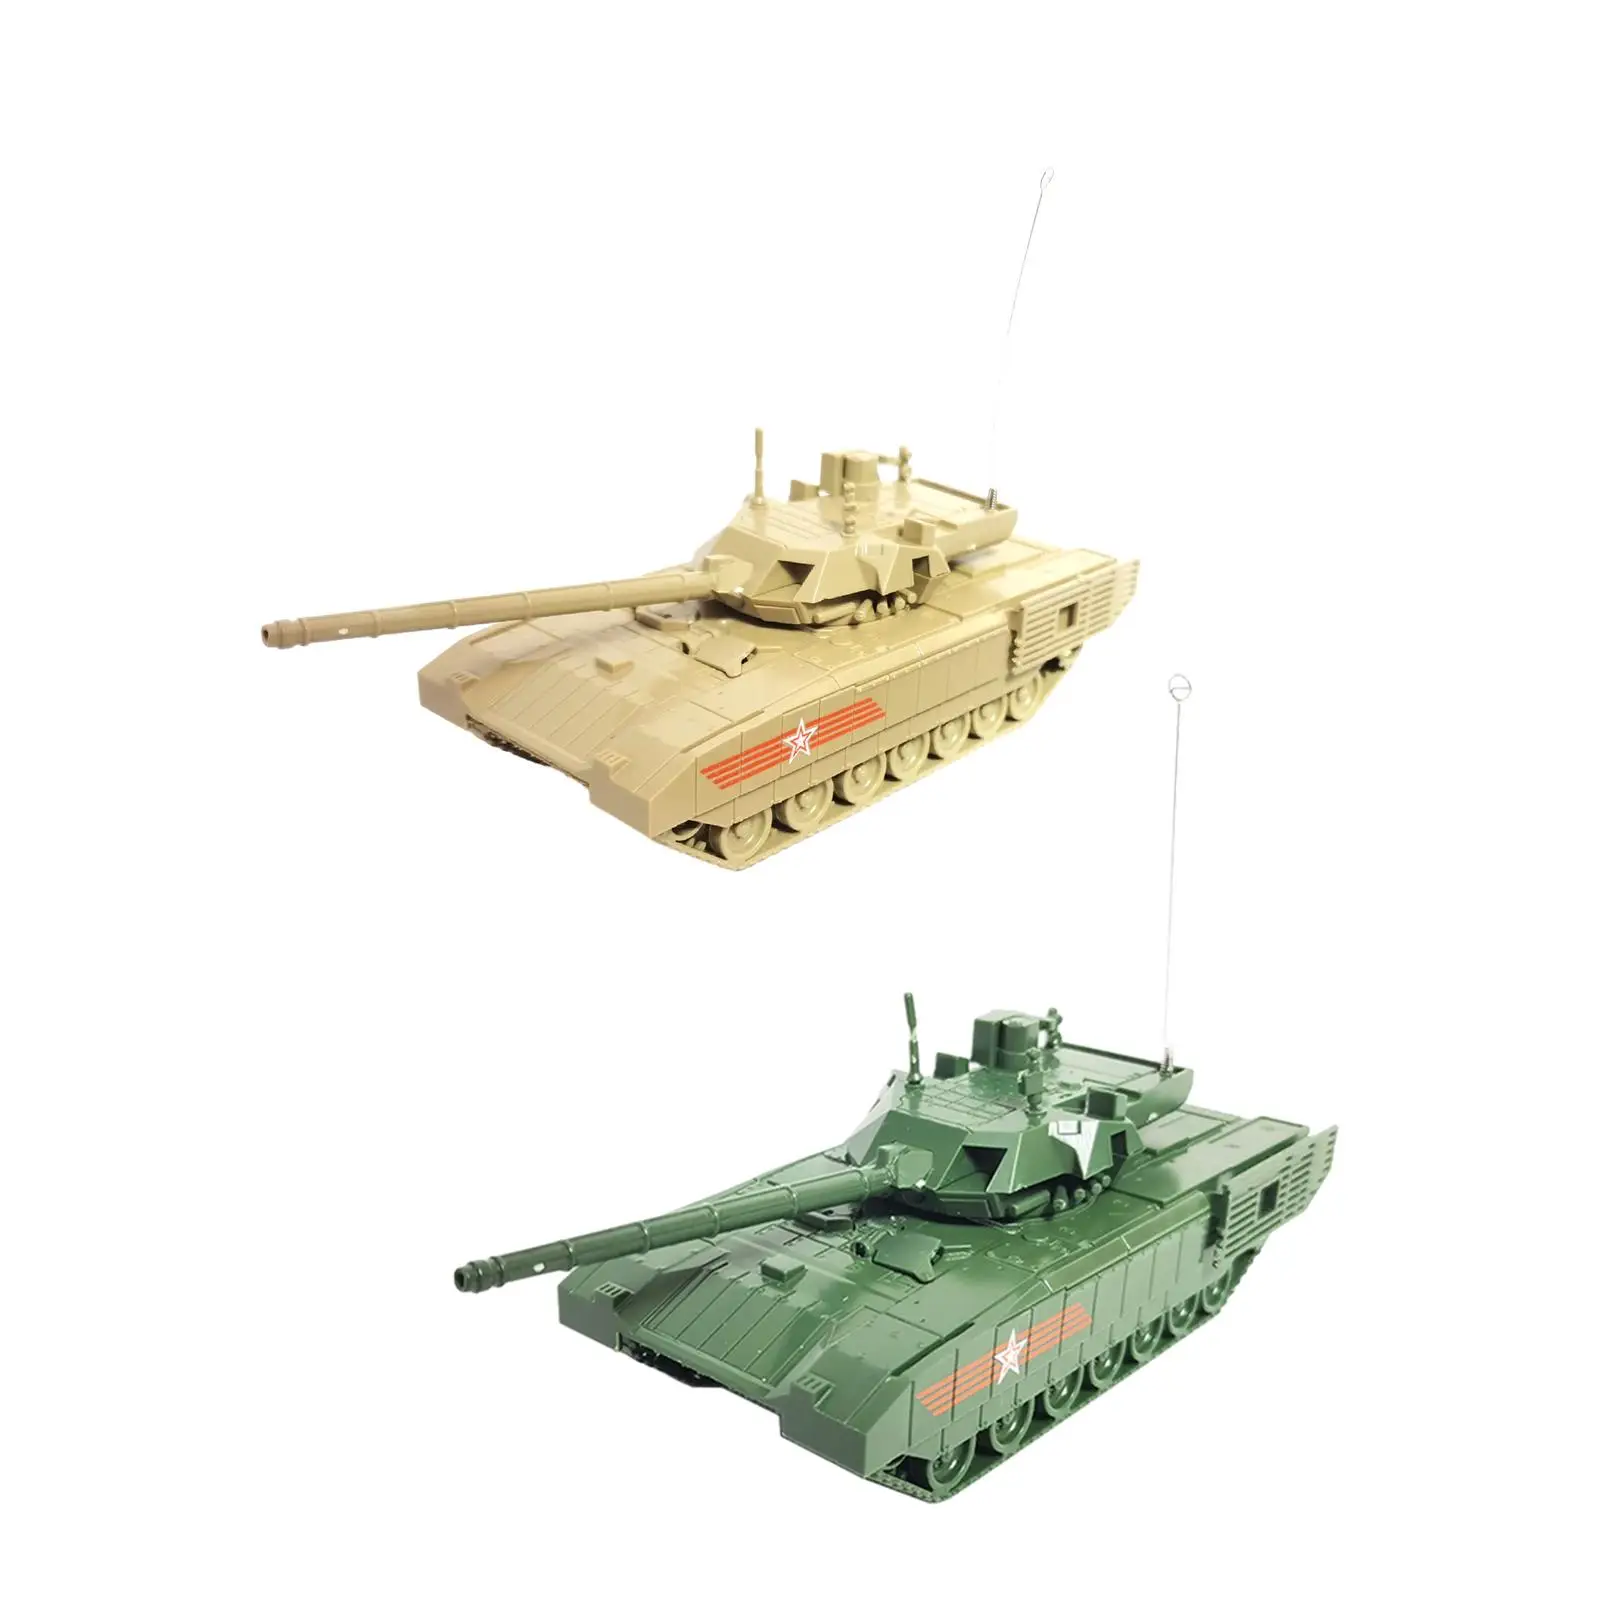 1:72 Armored Vehicles Building Model Kits Miniature Crawler Chariot for Collectibles Boys Kids Party Favors Keepsake Display